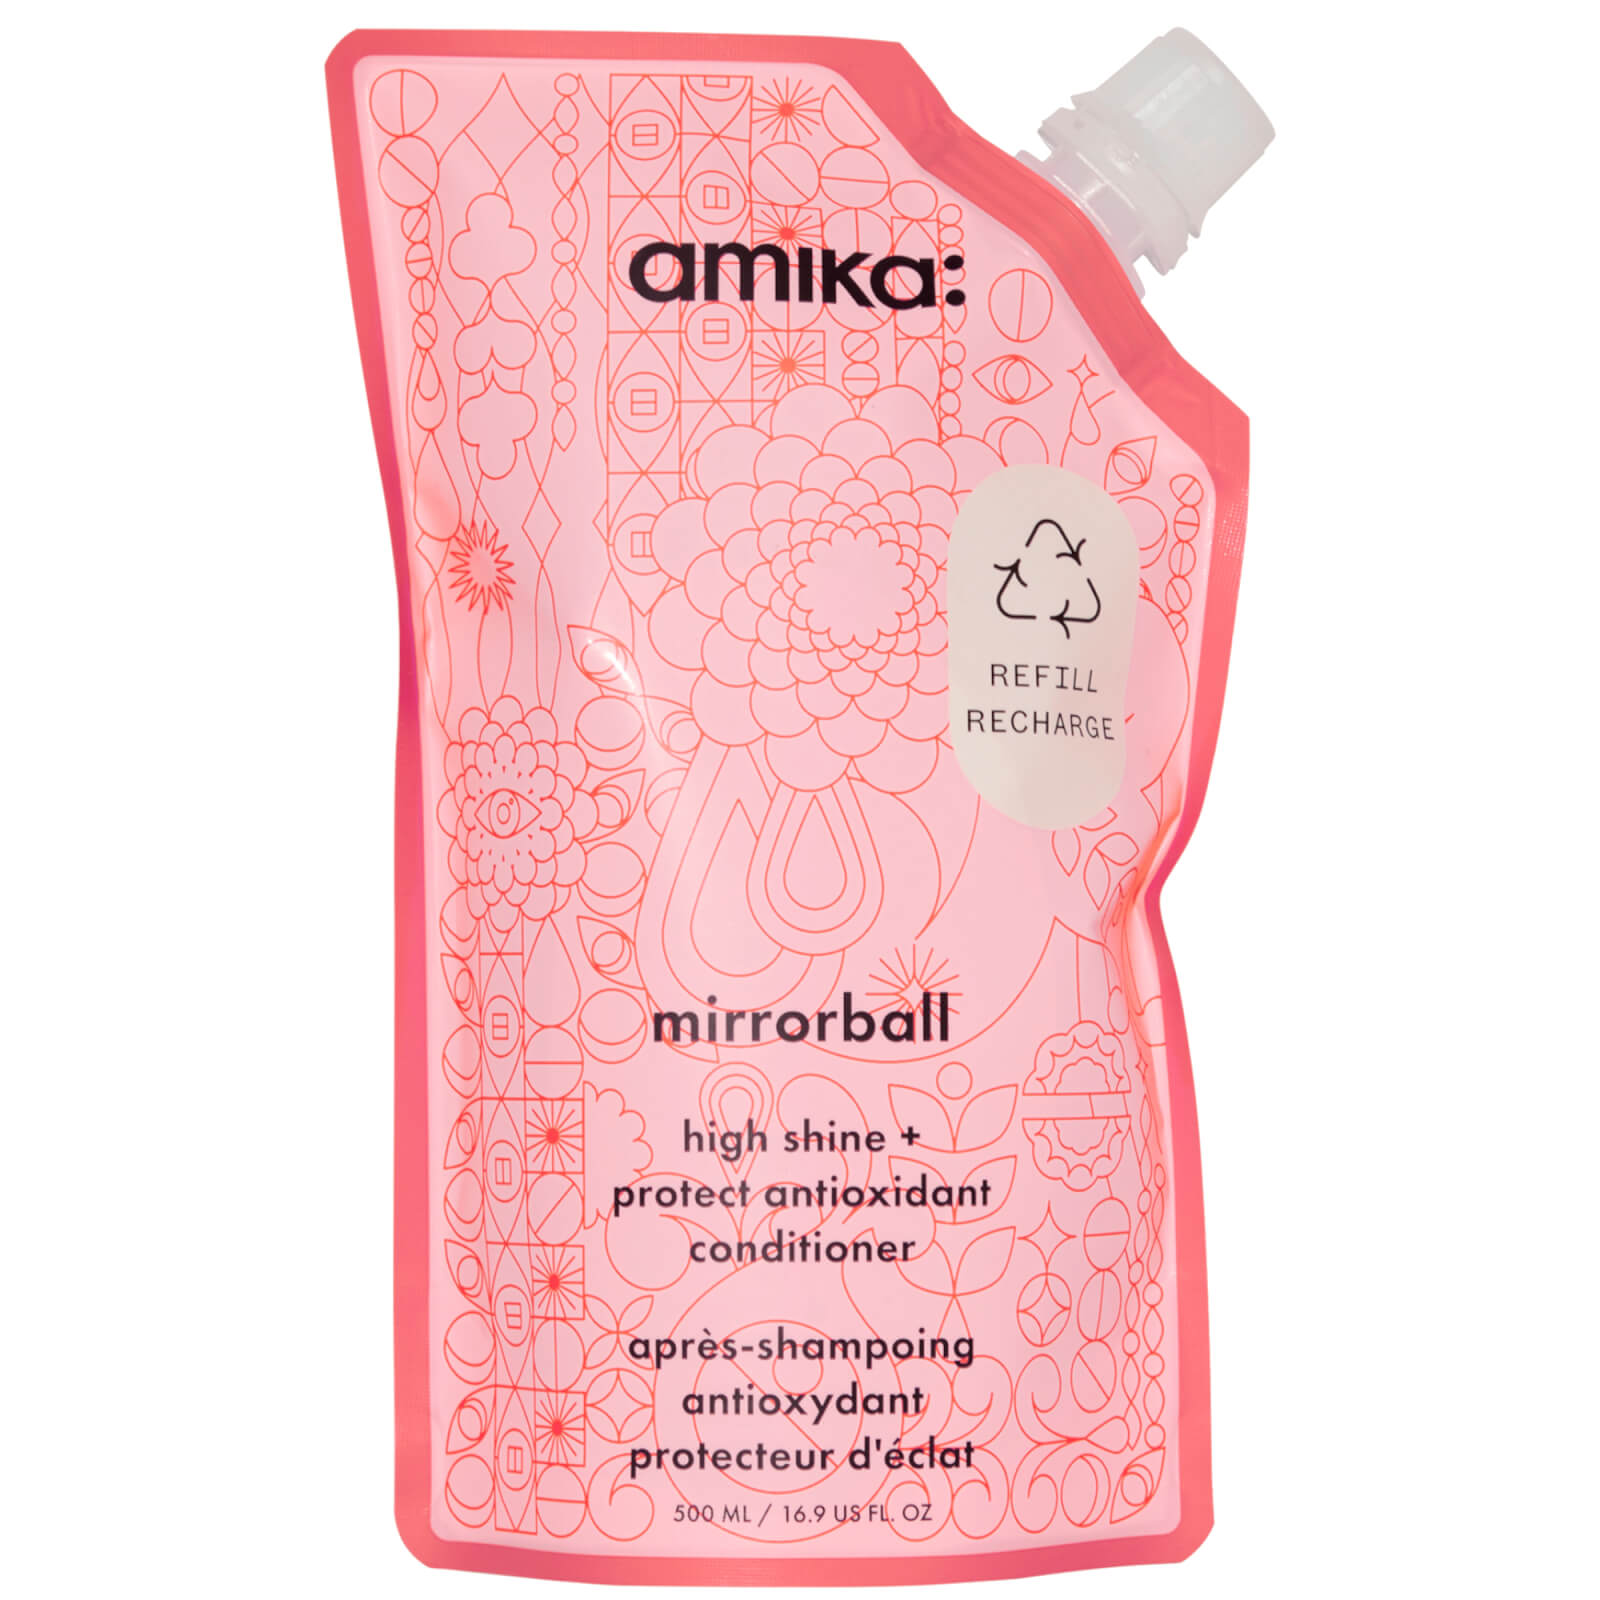 Photos - Hair Product Amika Mirrorball High Shine + Protect Antioxident Conditioner - 500ml - Re 